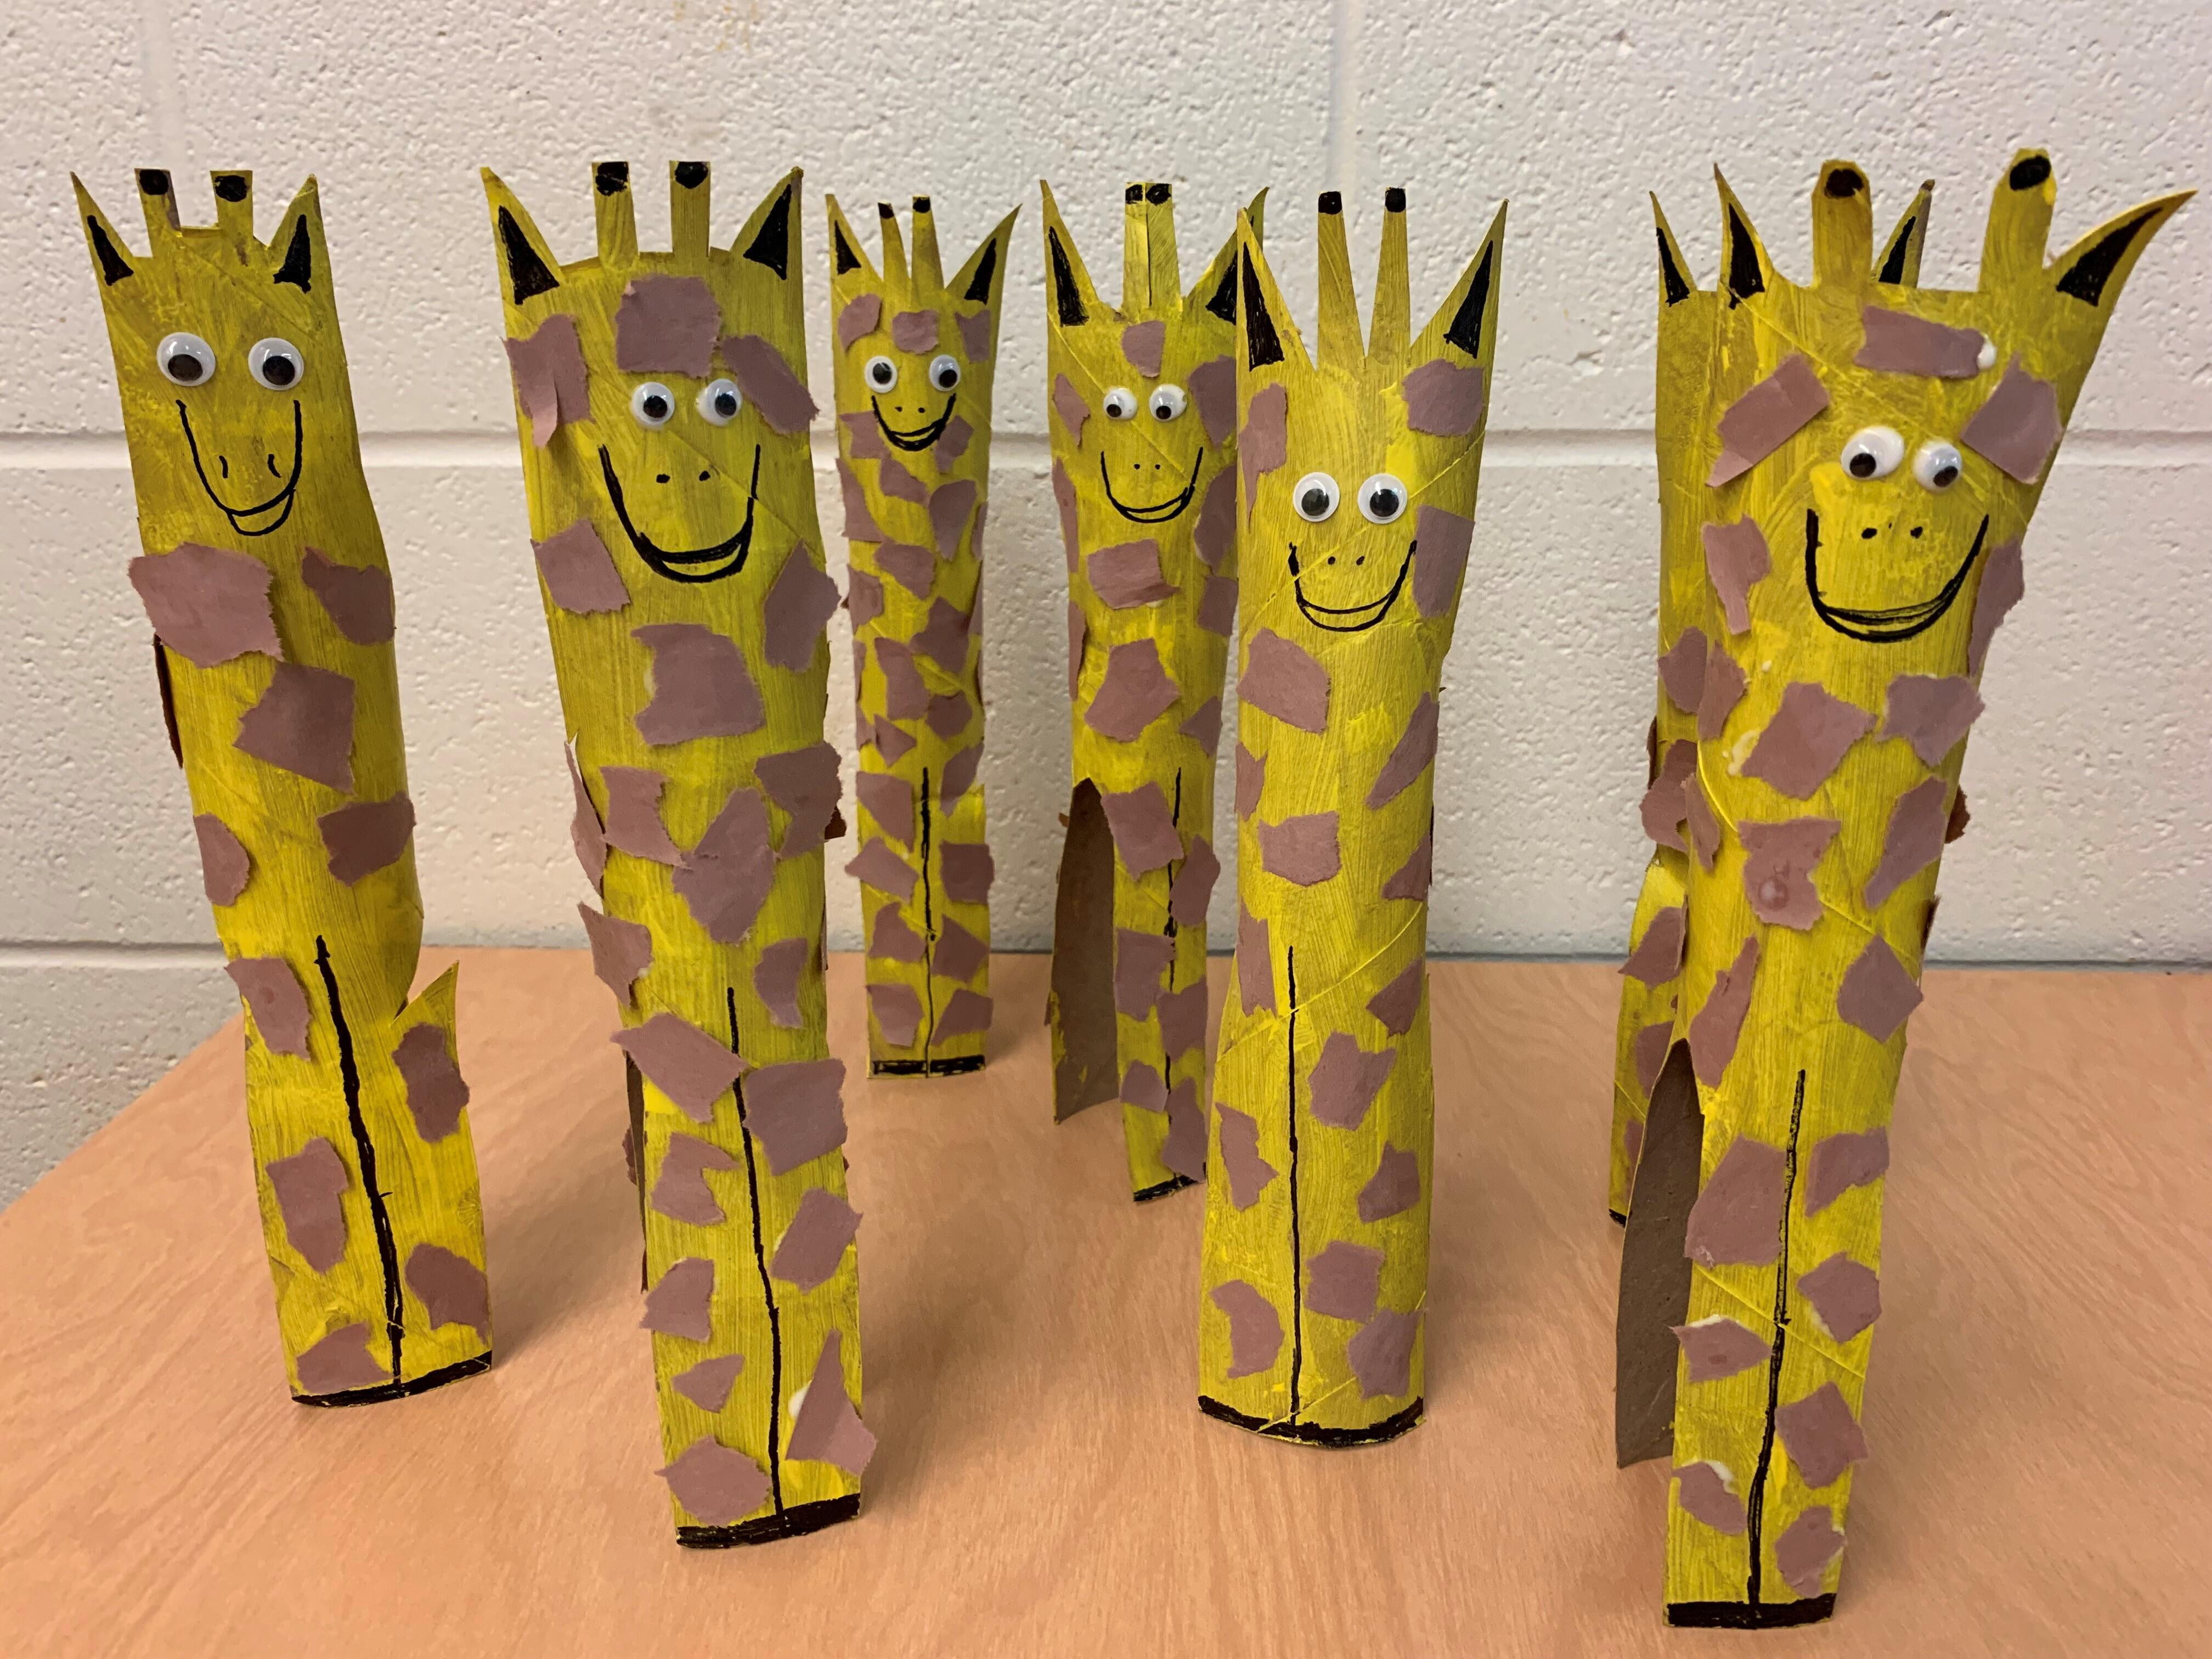 Here are a happy bunch of giraffes that the students created.